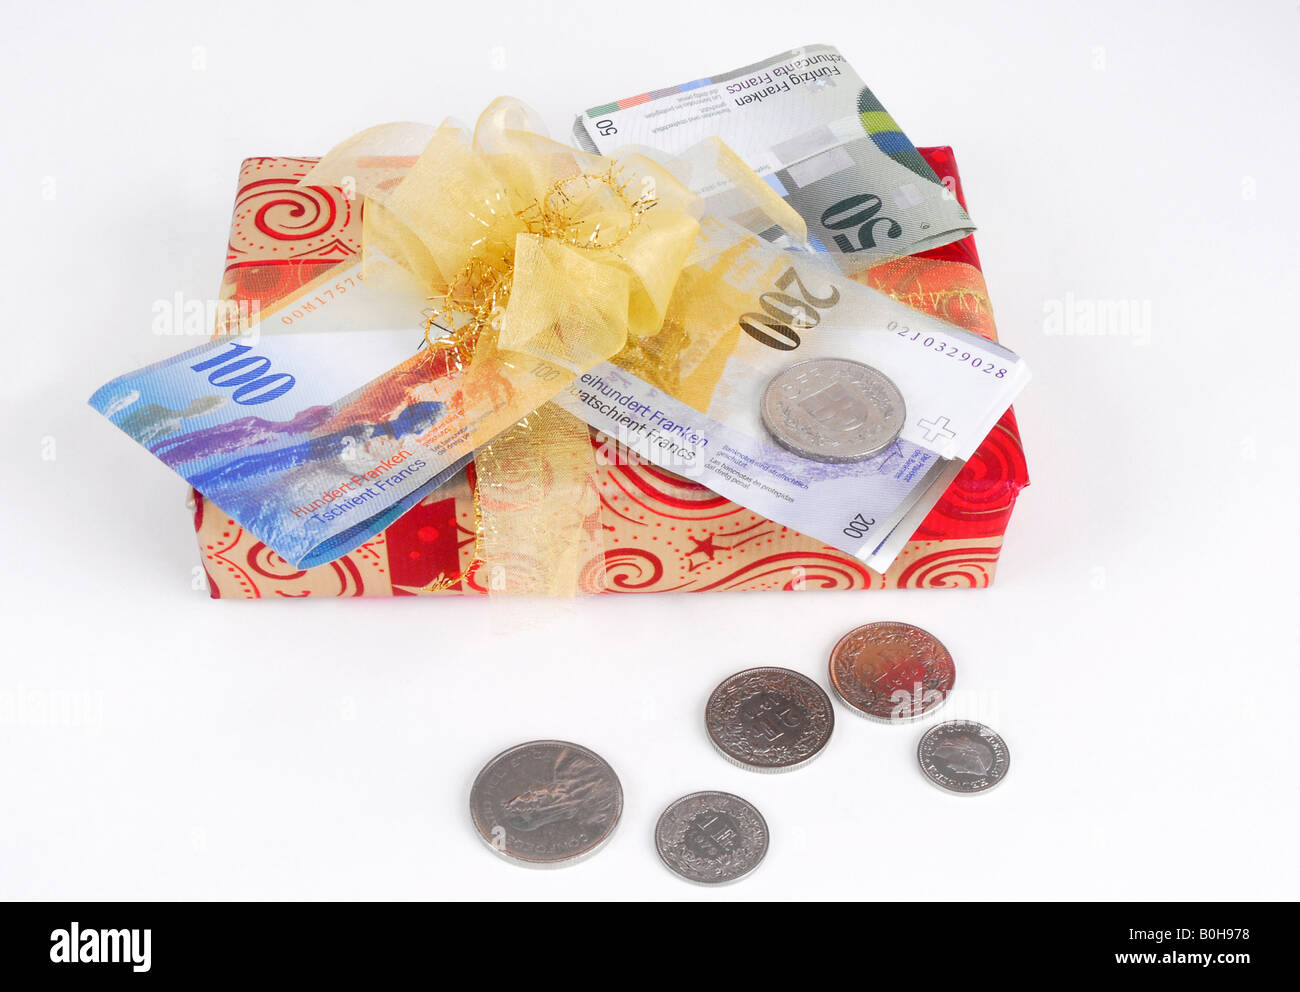 Swiss Francs on a wrapped present Stock Photo